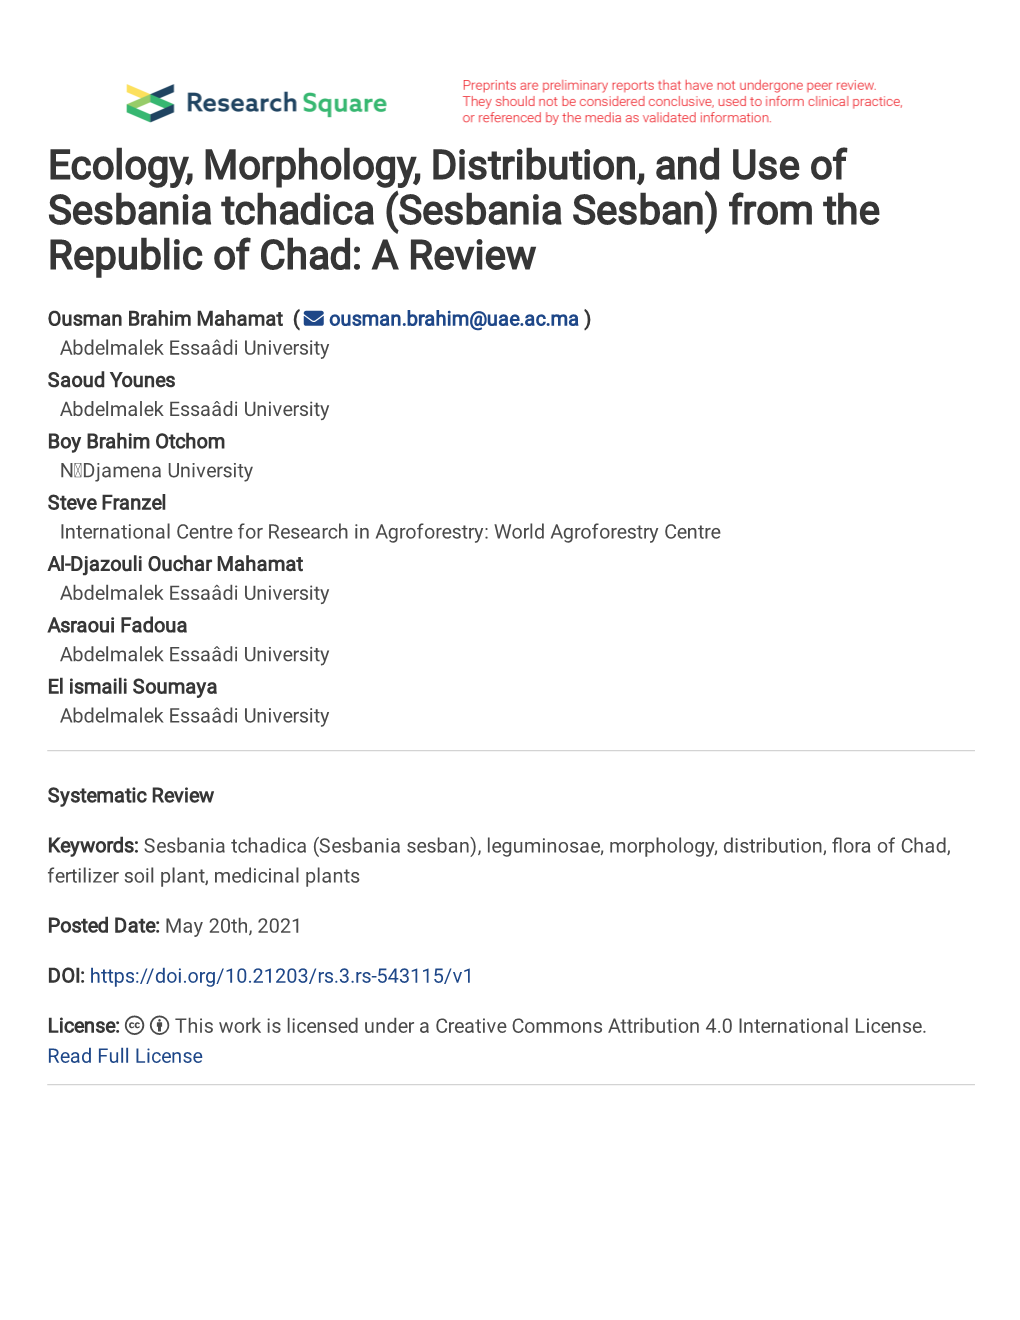 Sesbania Sesban) from the Republic of Chad: a Review